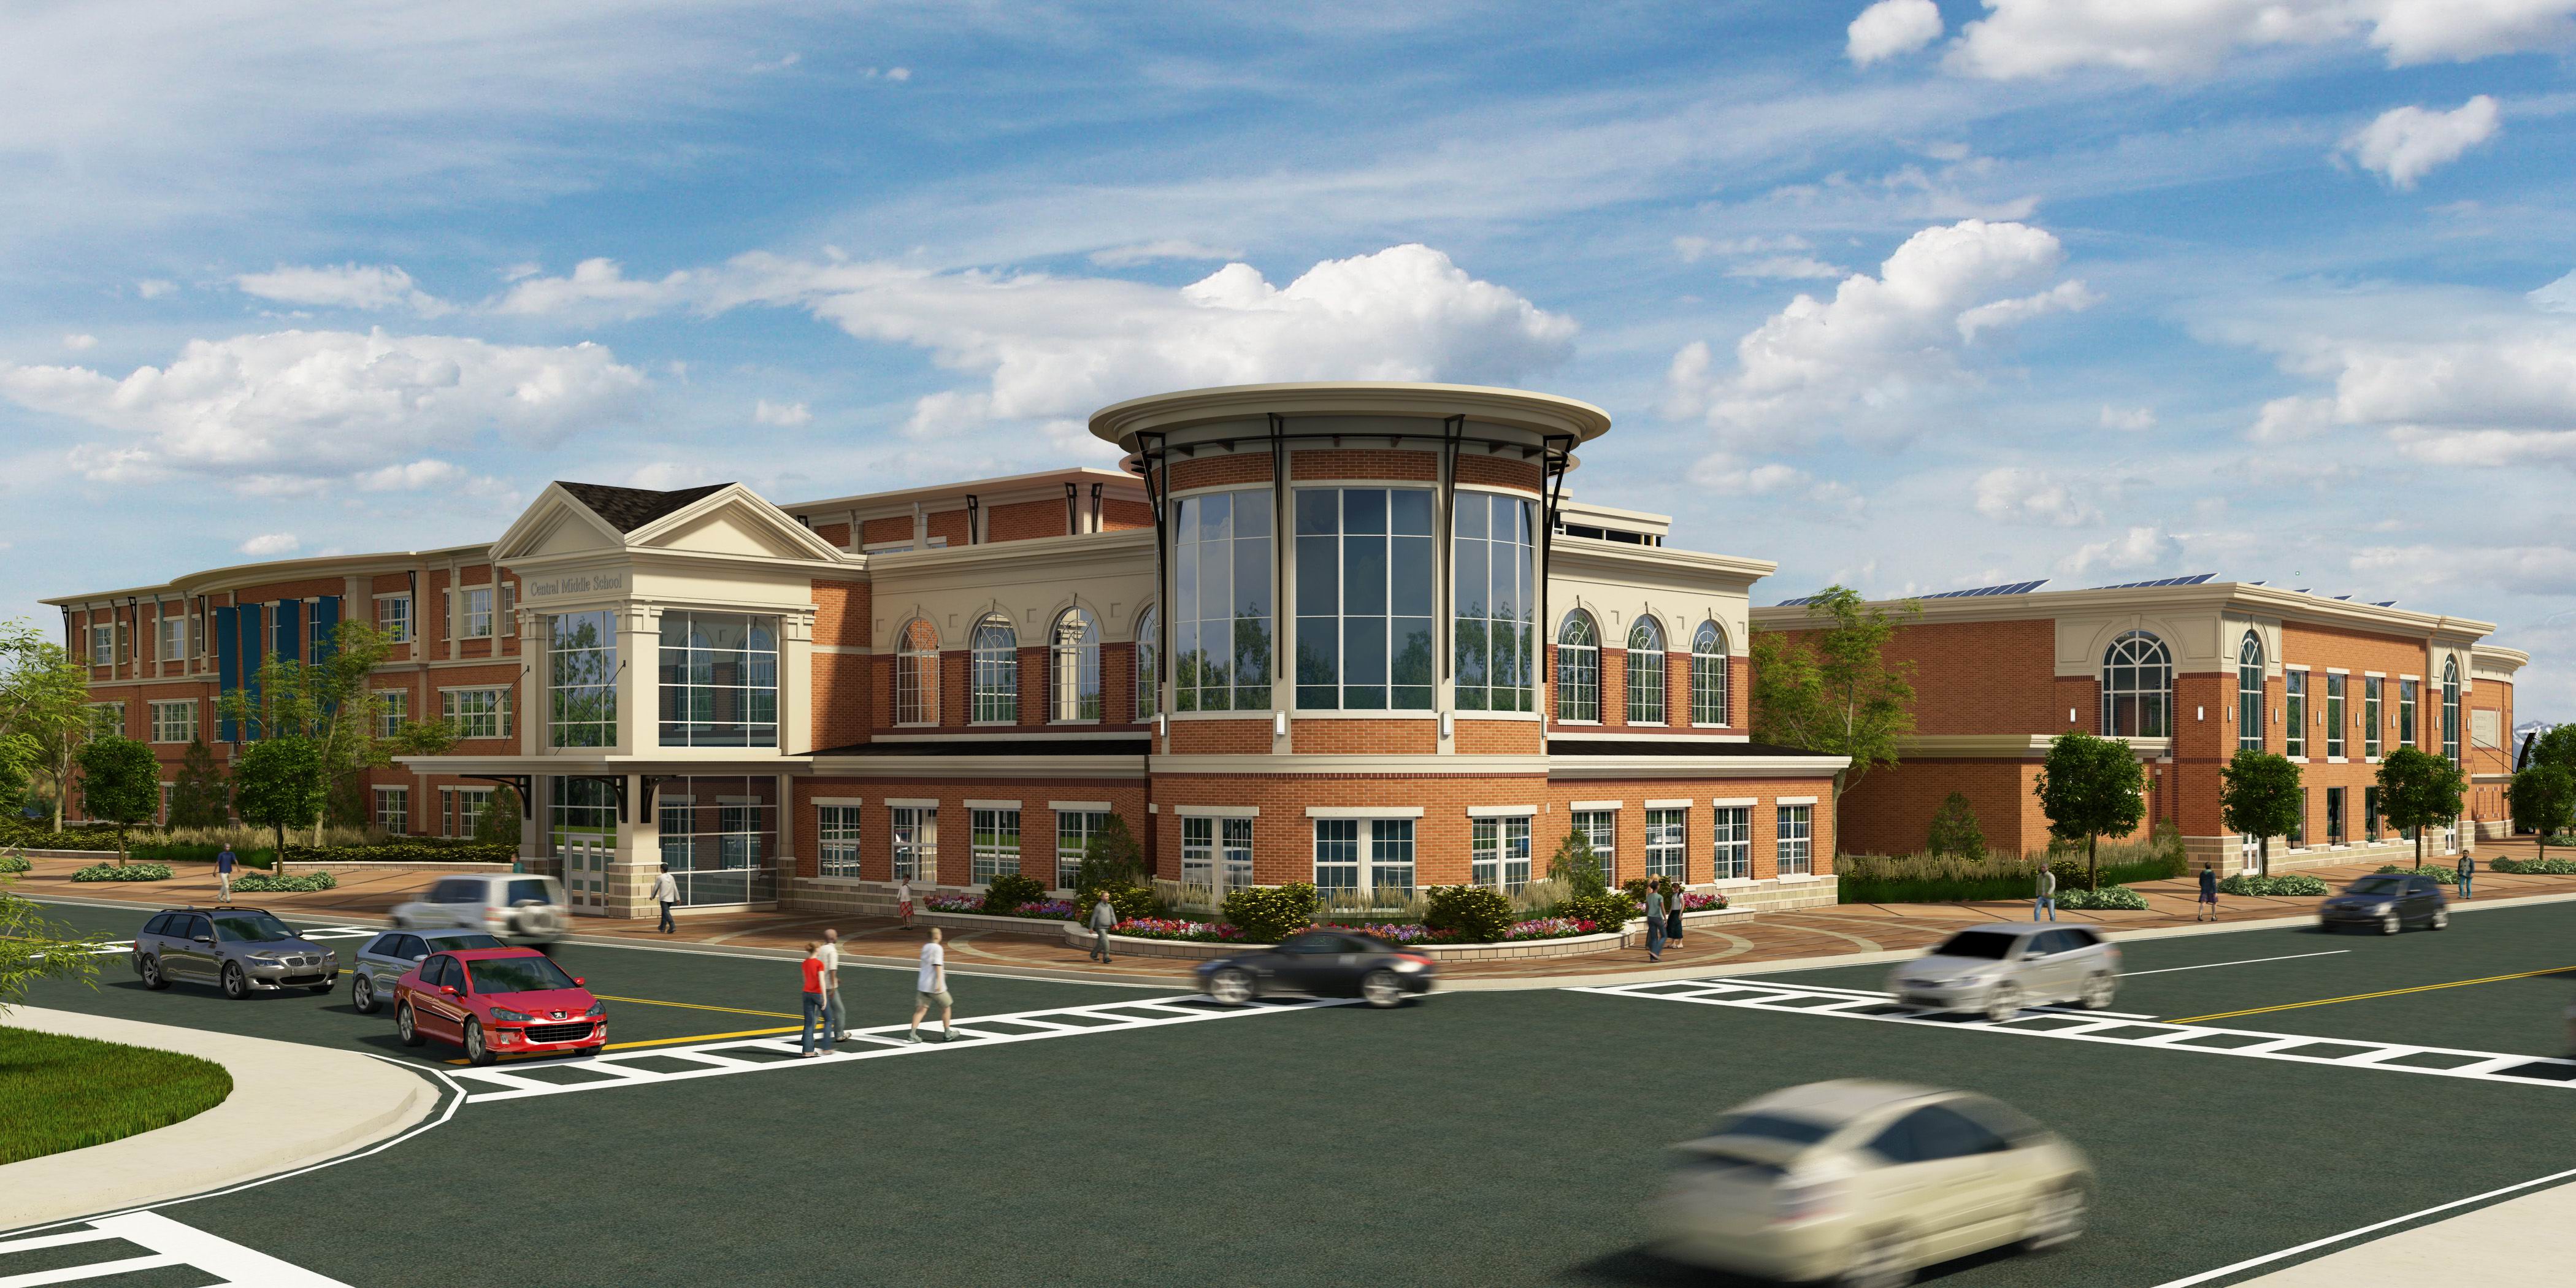 Work On Schedule for Quincy Central Middle School HighProfile Quincy, MA Work is continuing